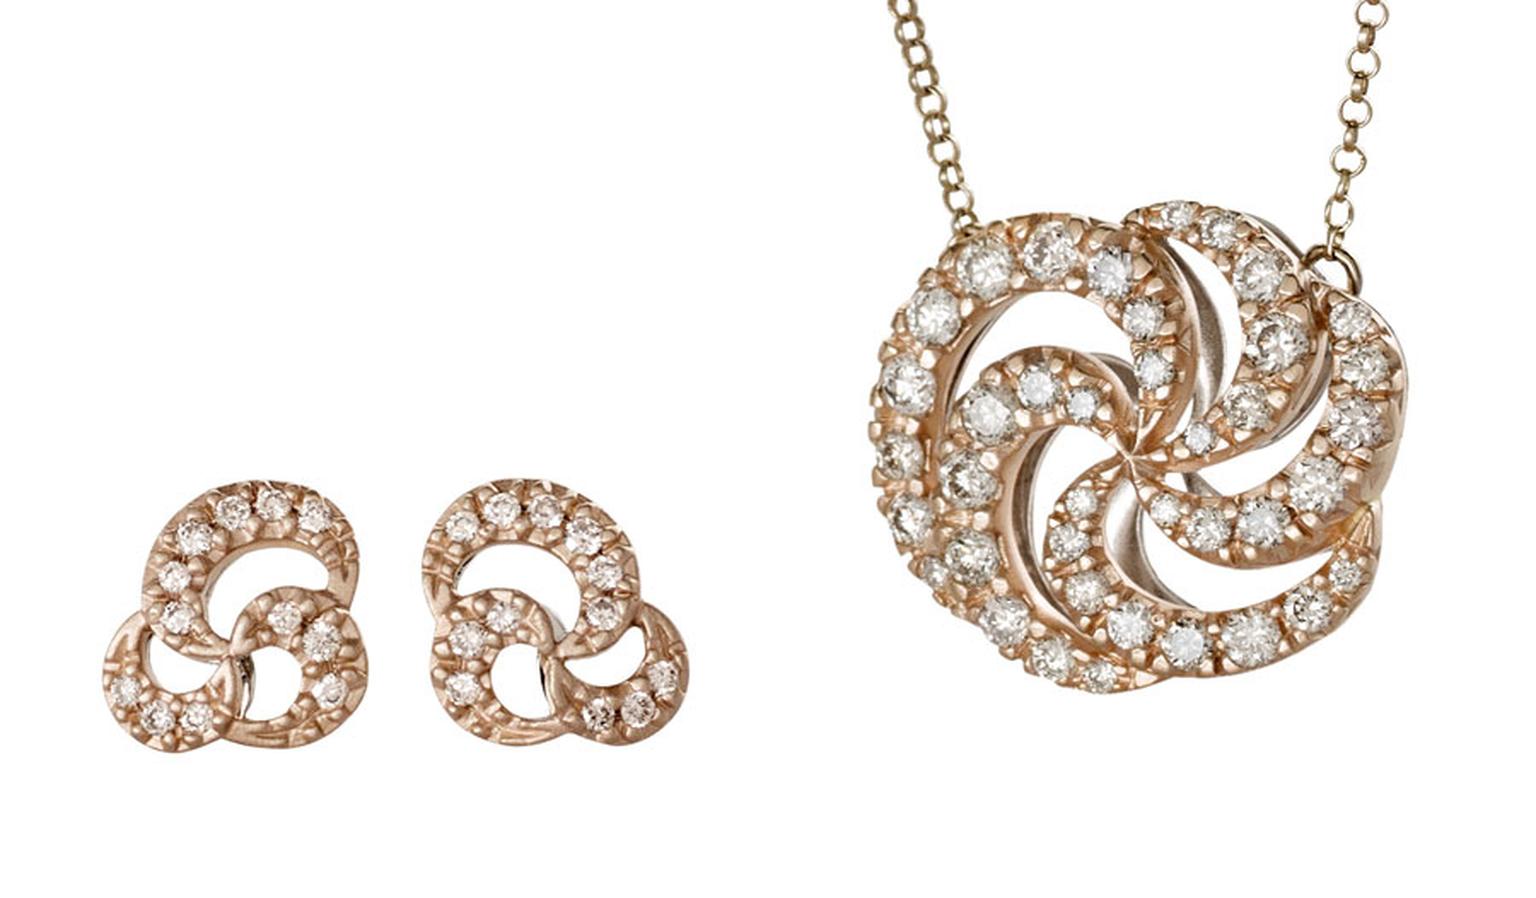 H-Stern-Earrings-and-pendant-in-rose-gold-with-diamonds.jpg